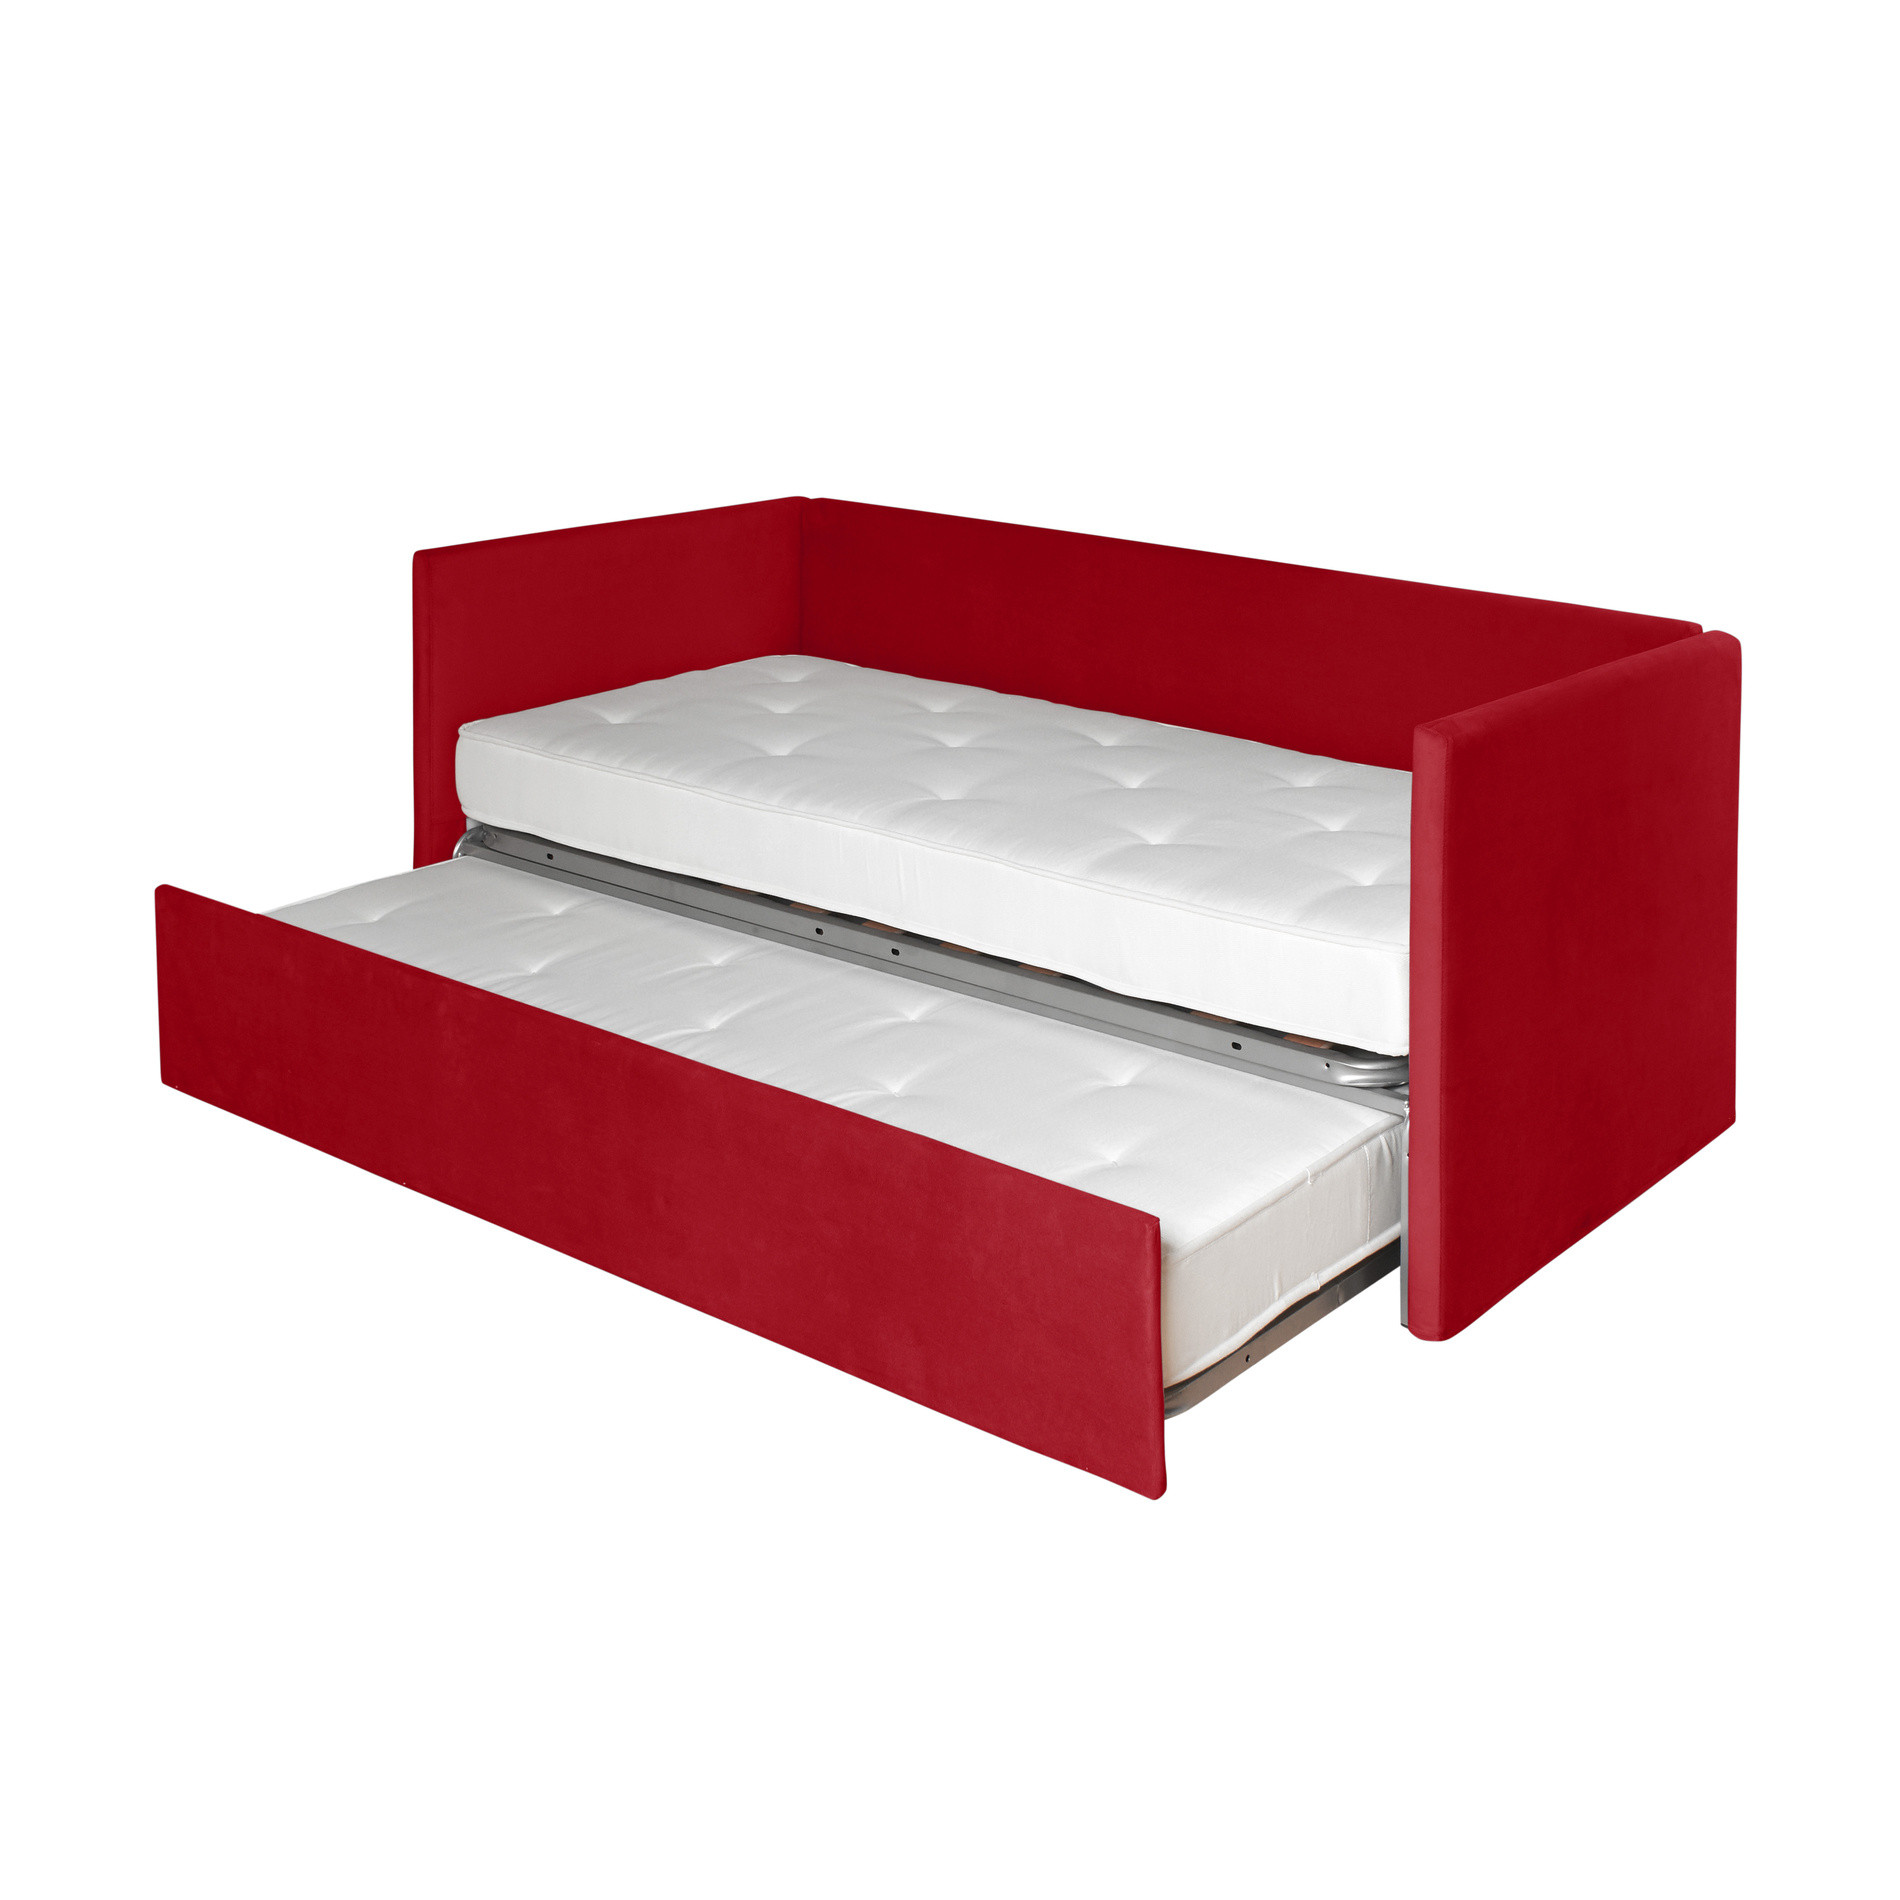 Multi sofa bed, Red, large image number 1